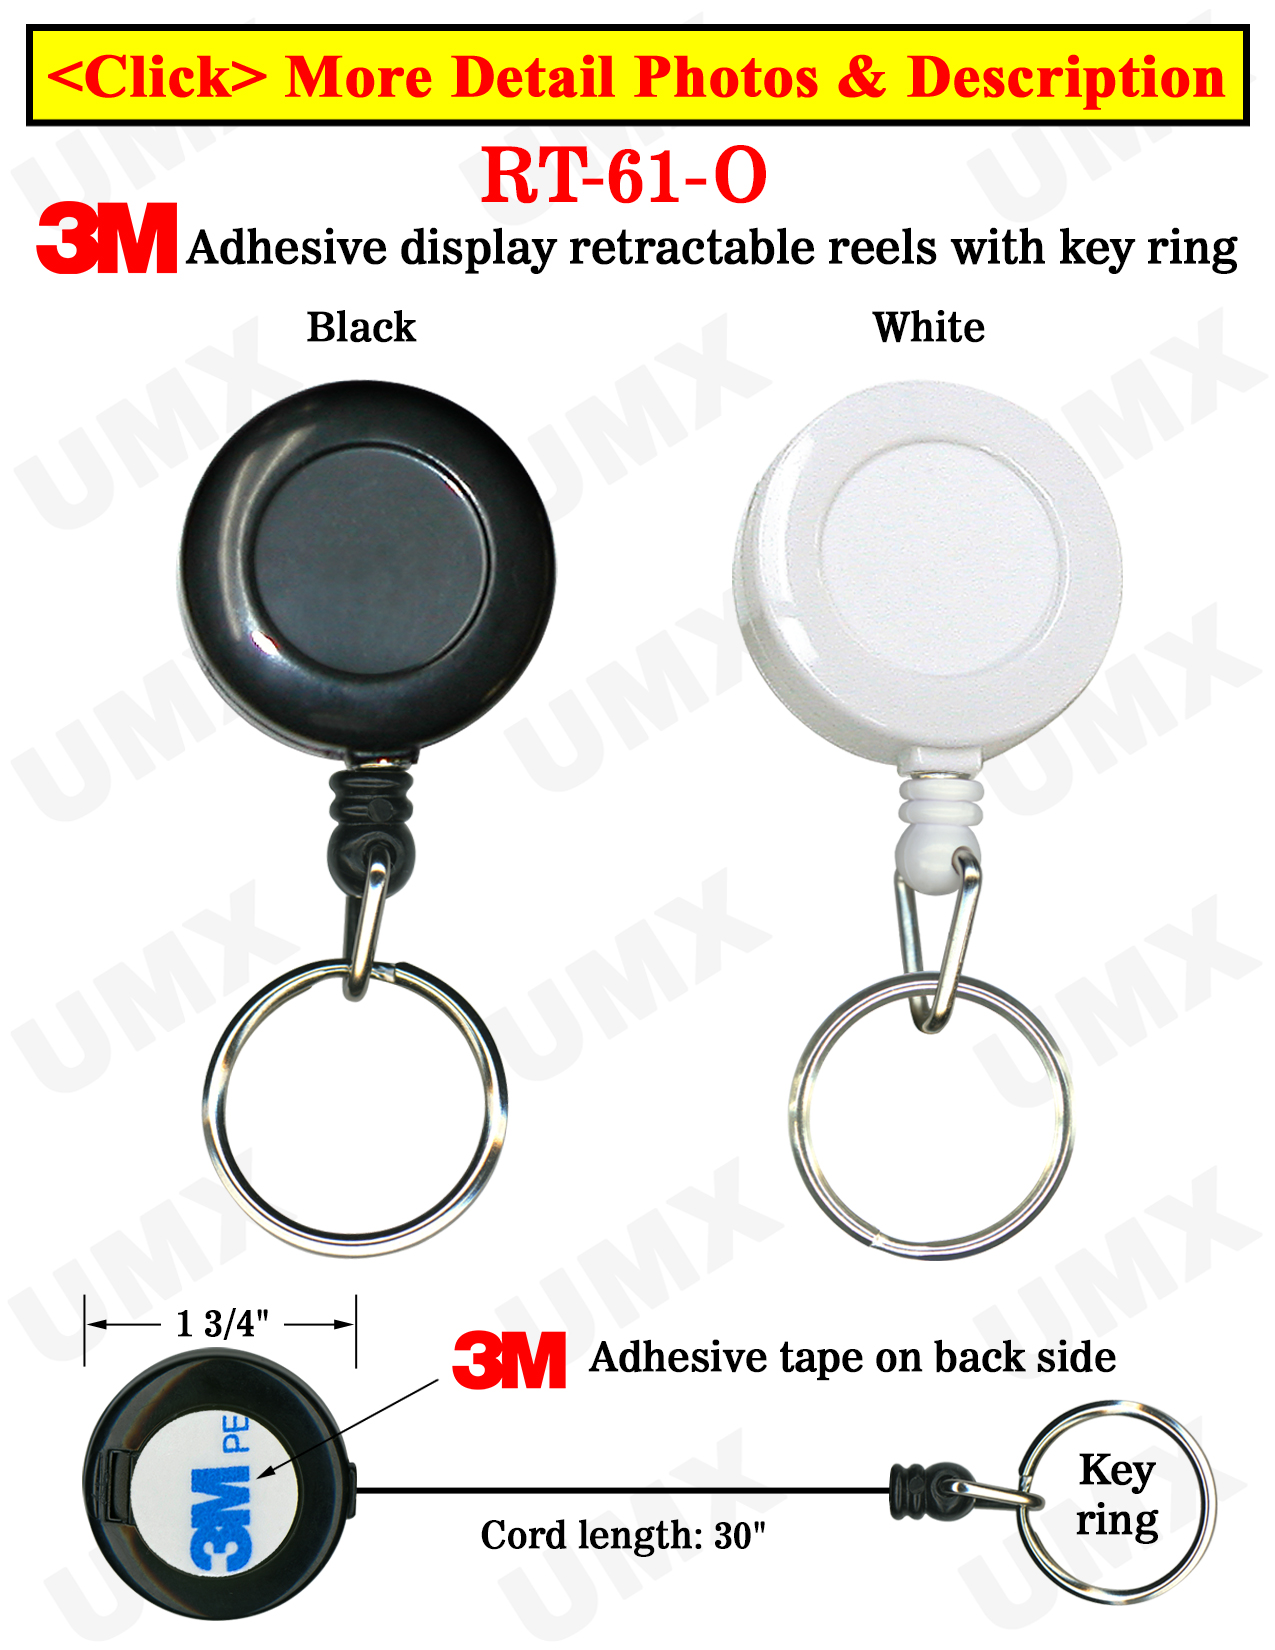 Low Cost Promotional Item Display Retractable Key Chain Reels With